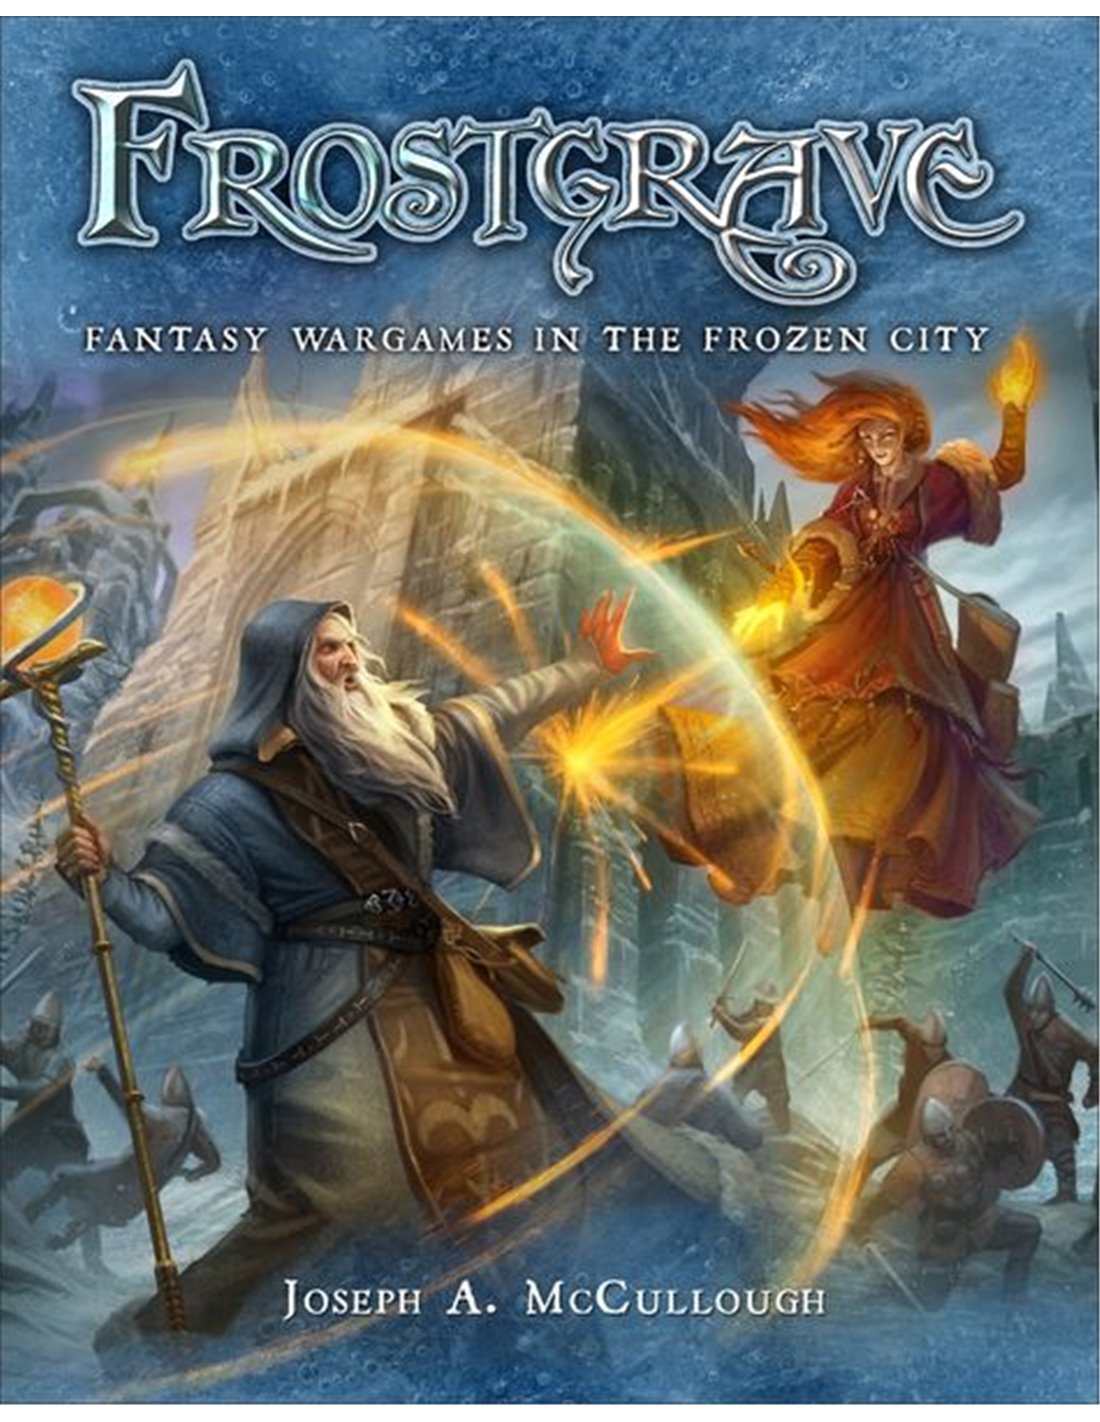 frostgrave 2nd edition pdf free download